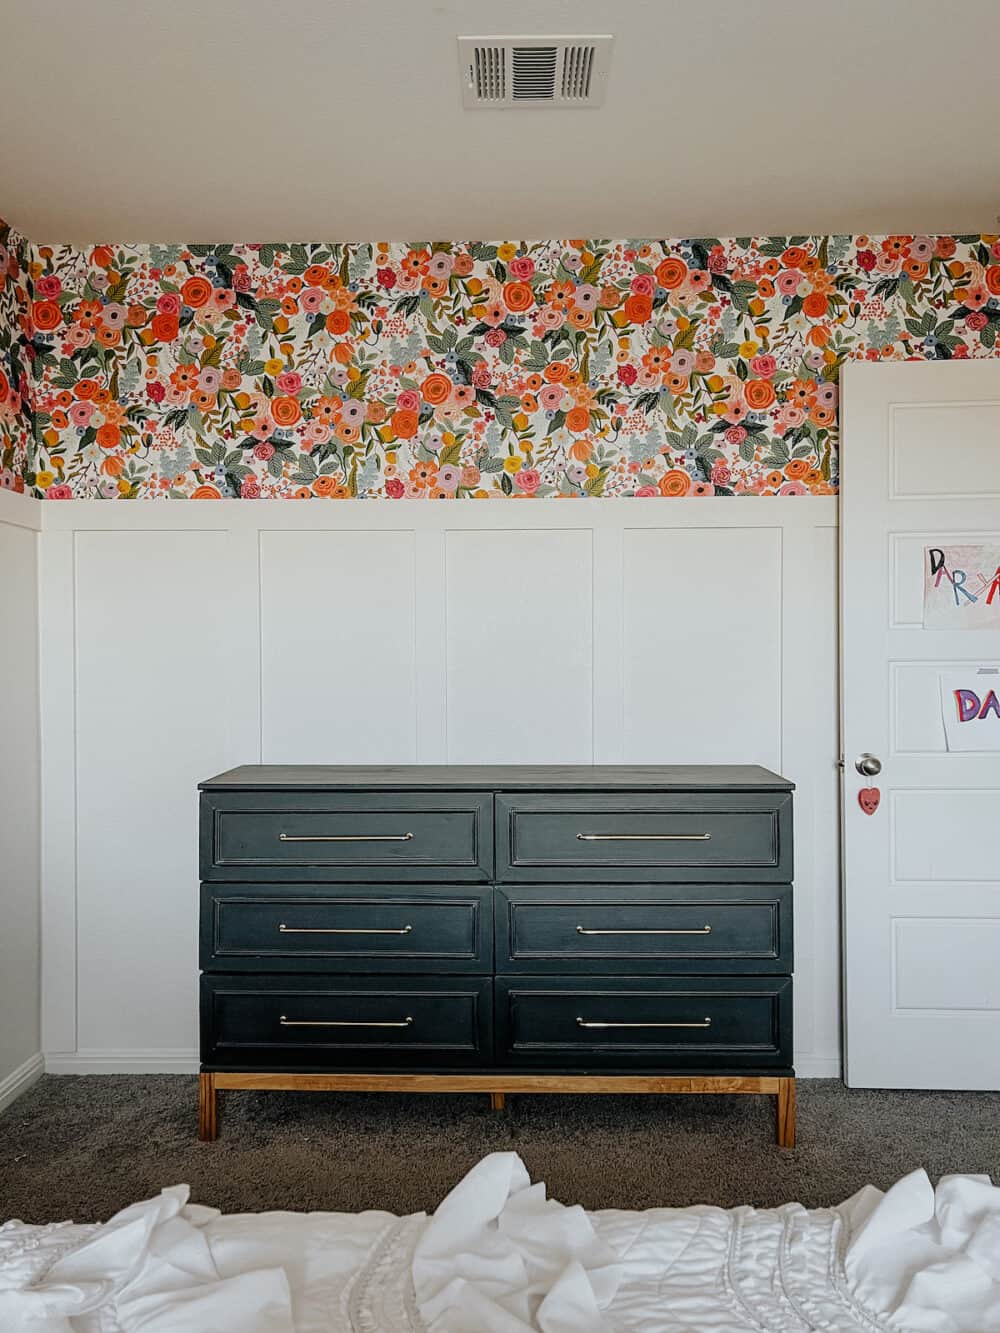 girls' room with floral wallpaper, a board and batten wall, and a black IKEA dresser 